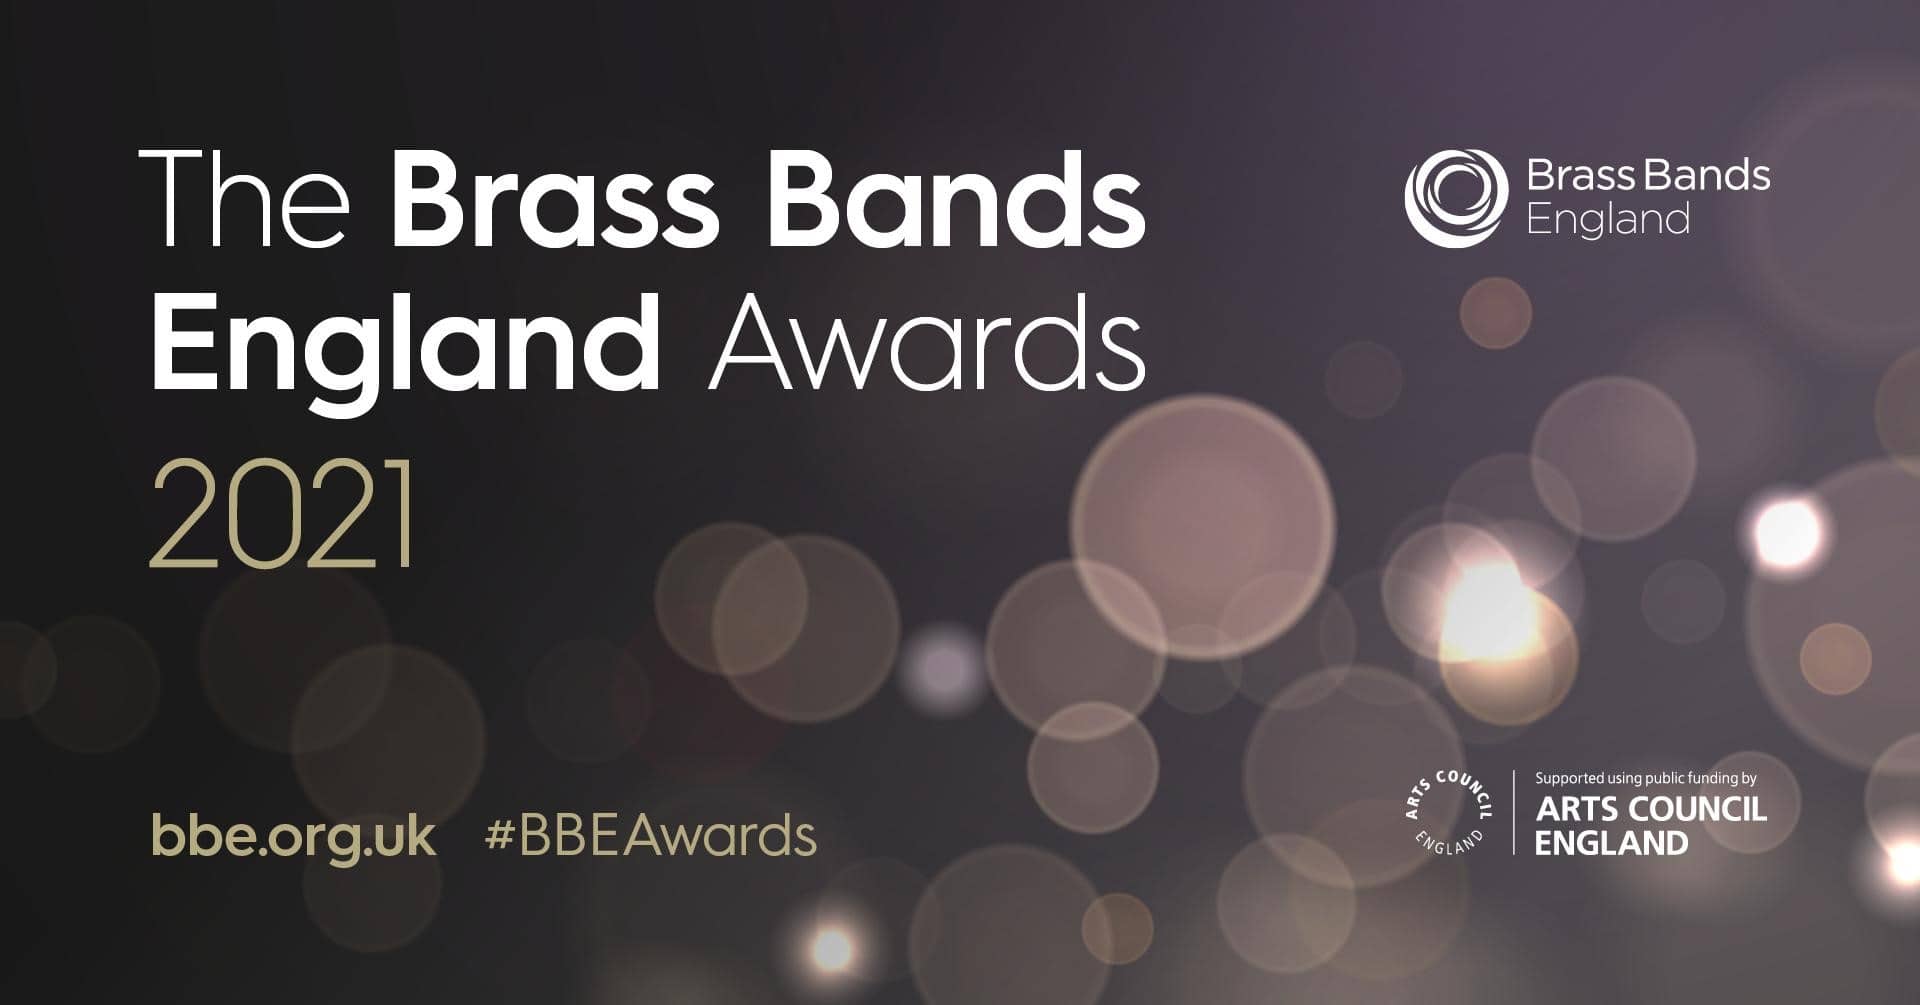 The Brass Band England Awards 2021 is written over a background of sparkling lights